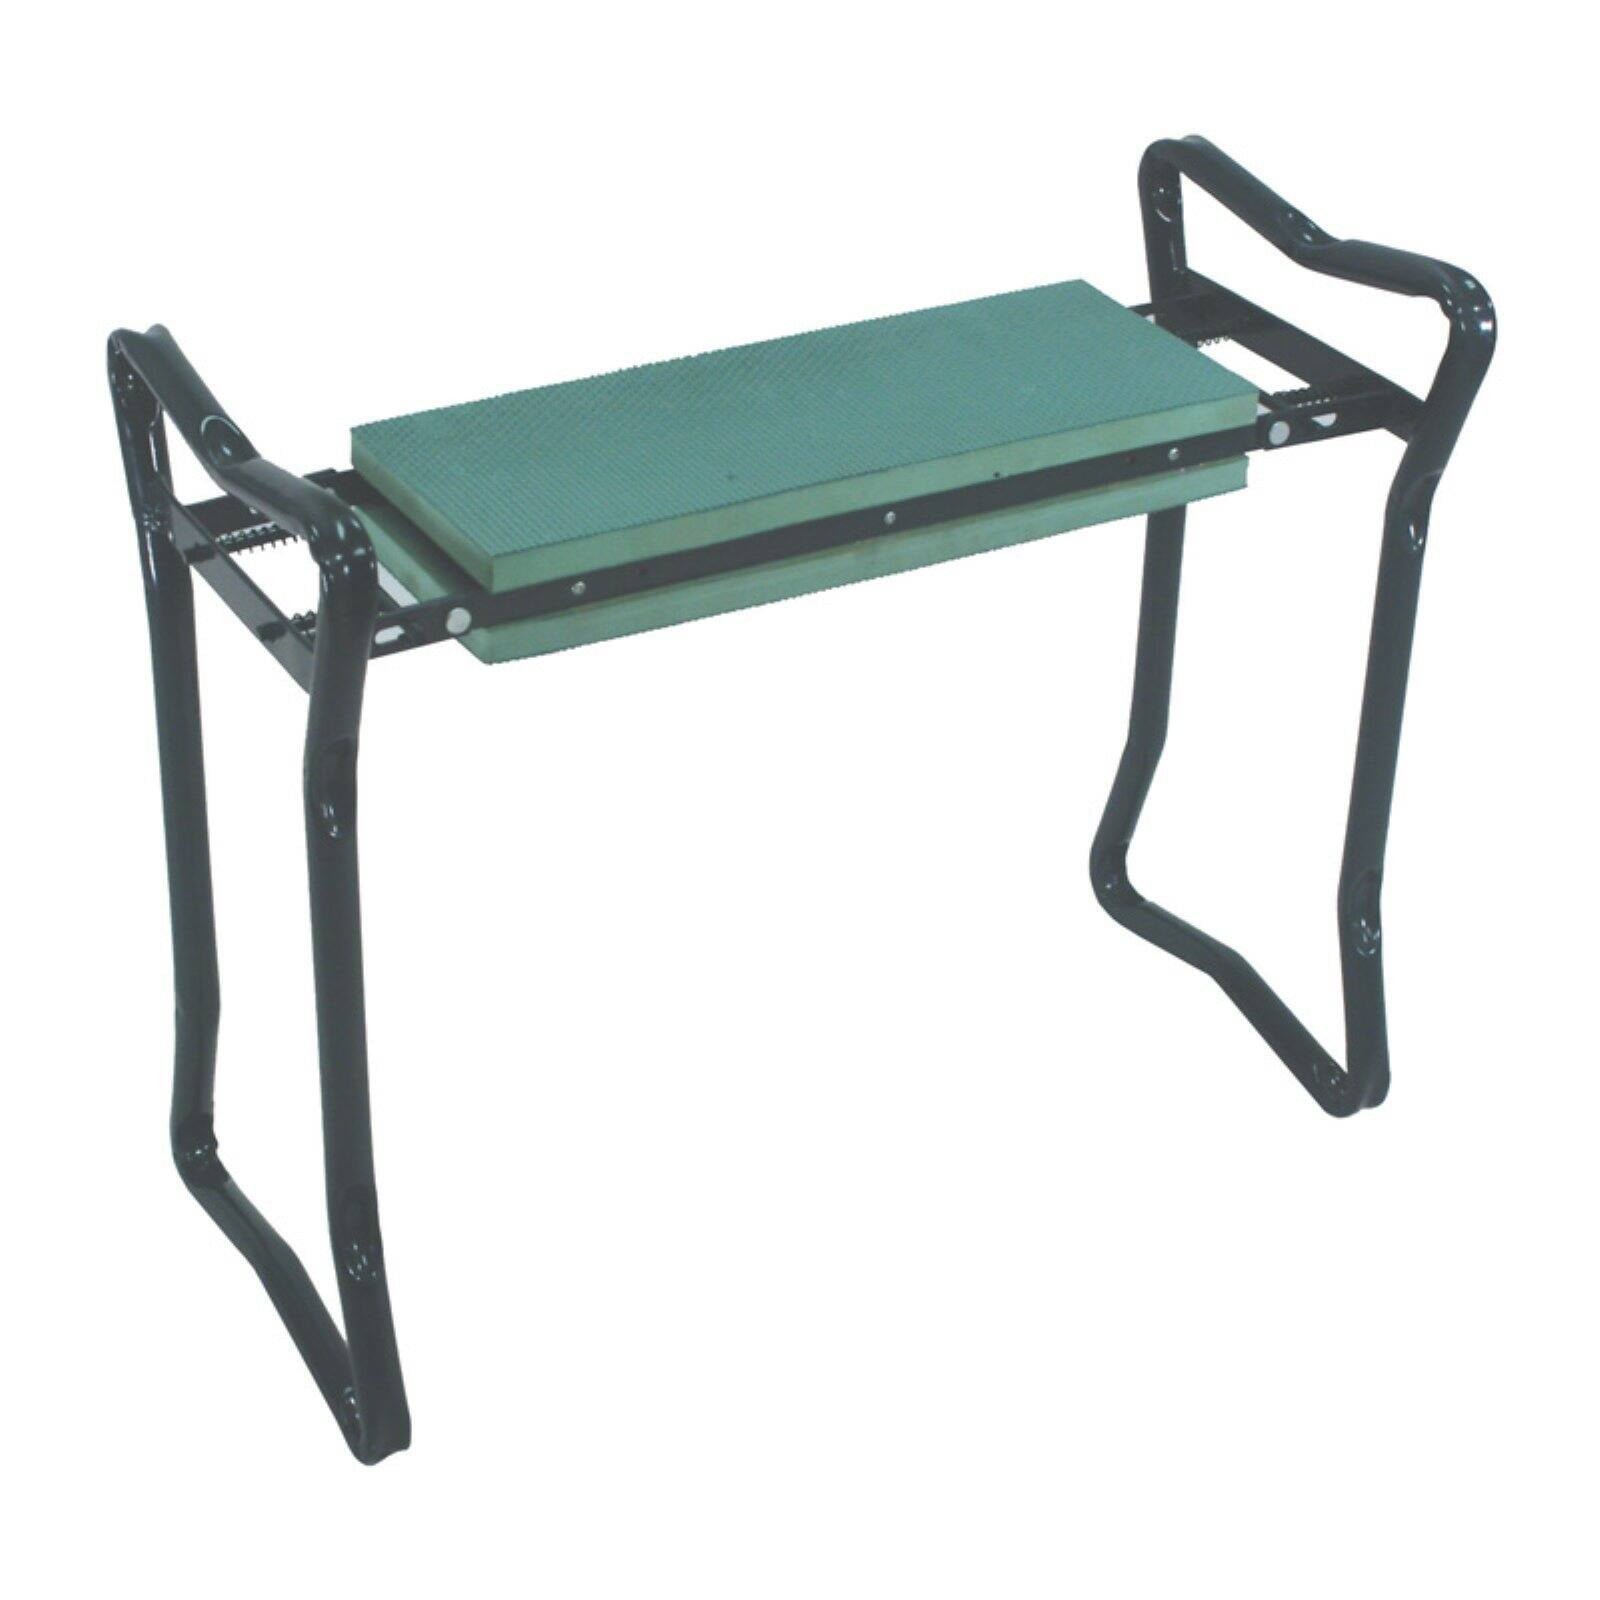 Details about   Outsunny Padded Garden Kneeler and Seat Bench Padded Foldable Garden Stool, 